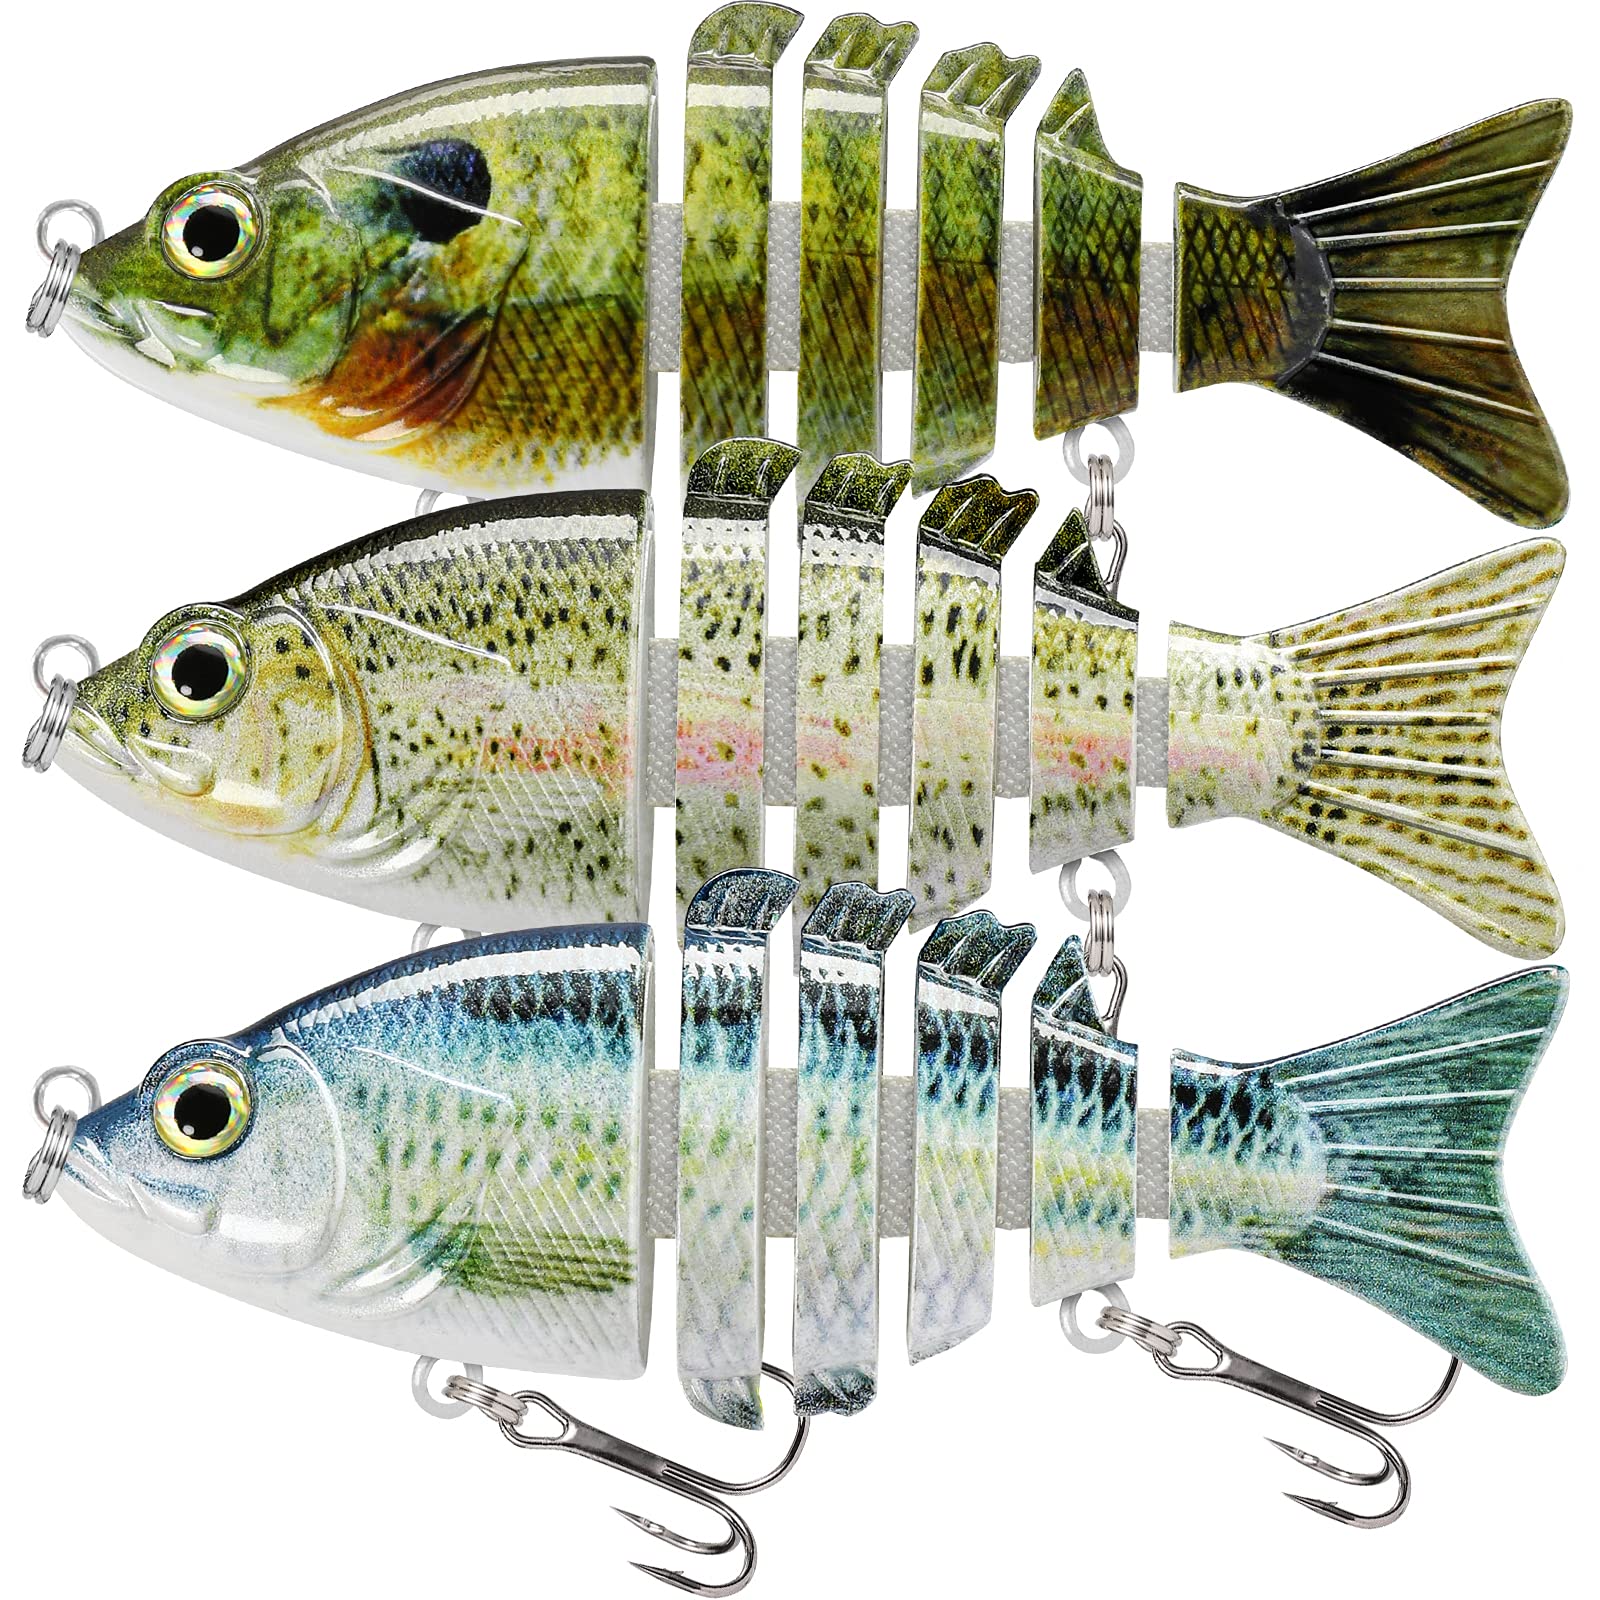 TRUSCEND Fishing Lures for Bass Trout, Multi Jointed Swimbaits, Slow  Sinking Bionic Swimming Lures for Freshwater Saltwater Bass Pike Crappie,  Lifelike Fishing Lures Kit